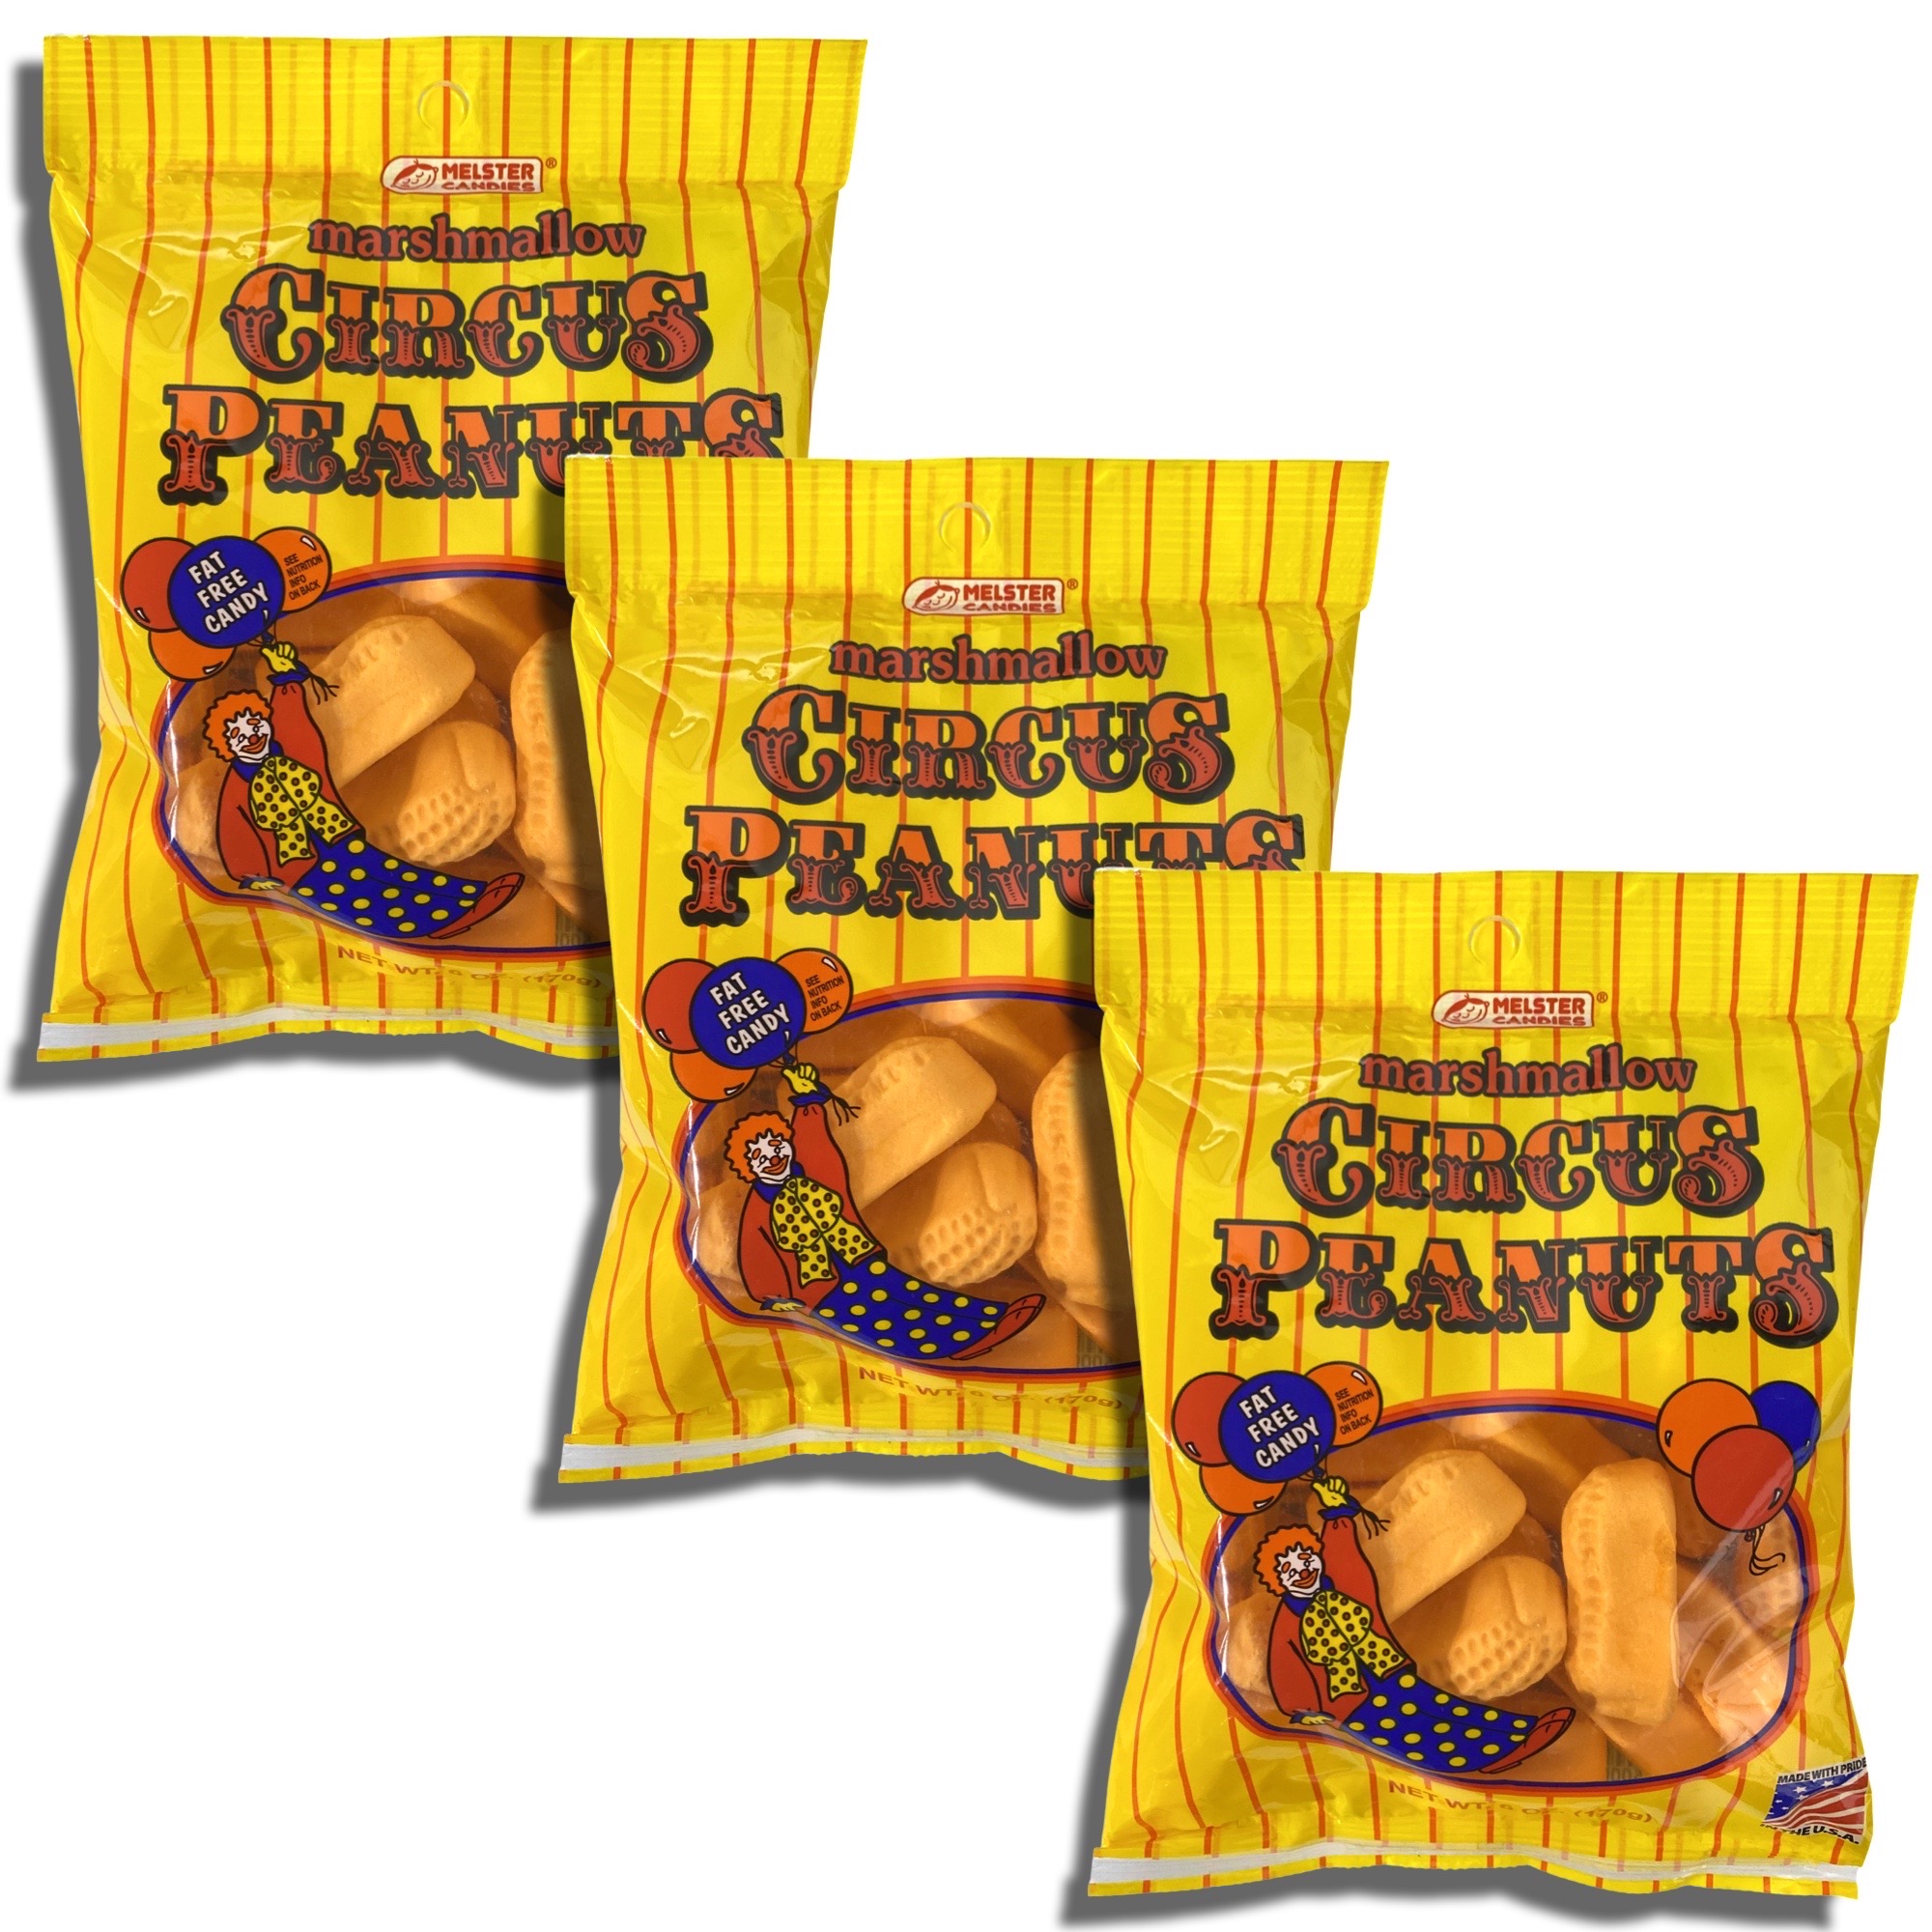 Marshmallow Circus Peanuts by Melster Bundled by Tribeca Curations | 6 Oz | Value Case Pack of 12 bags - image 2 of 5